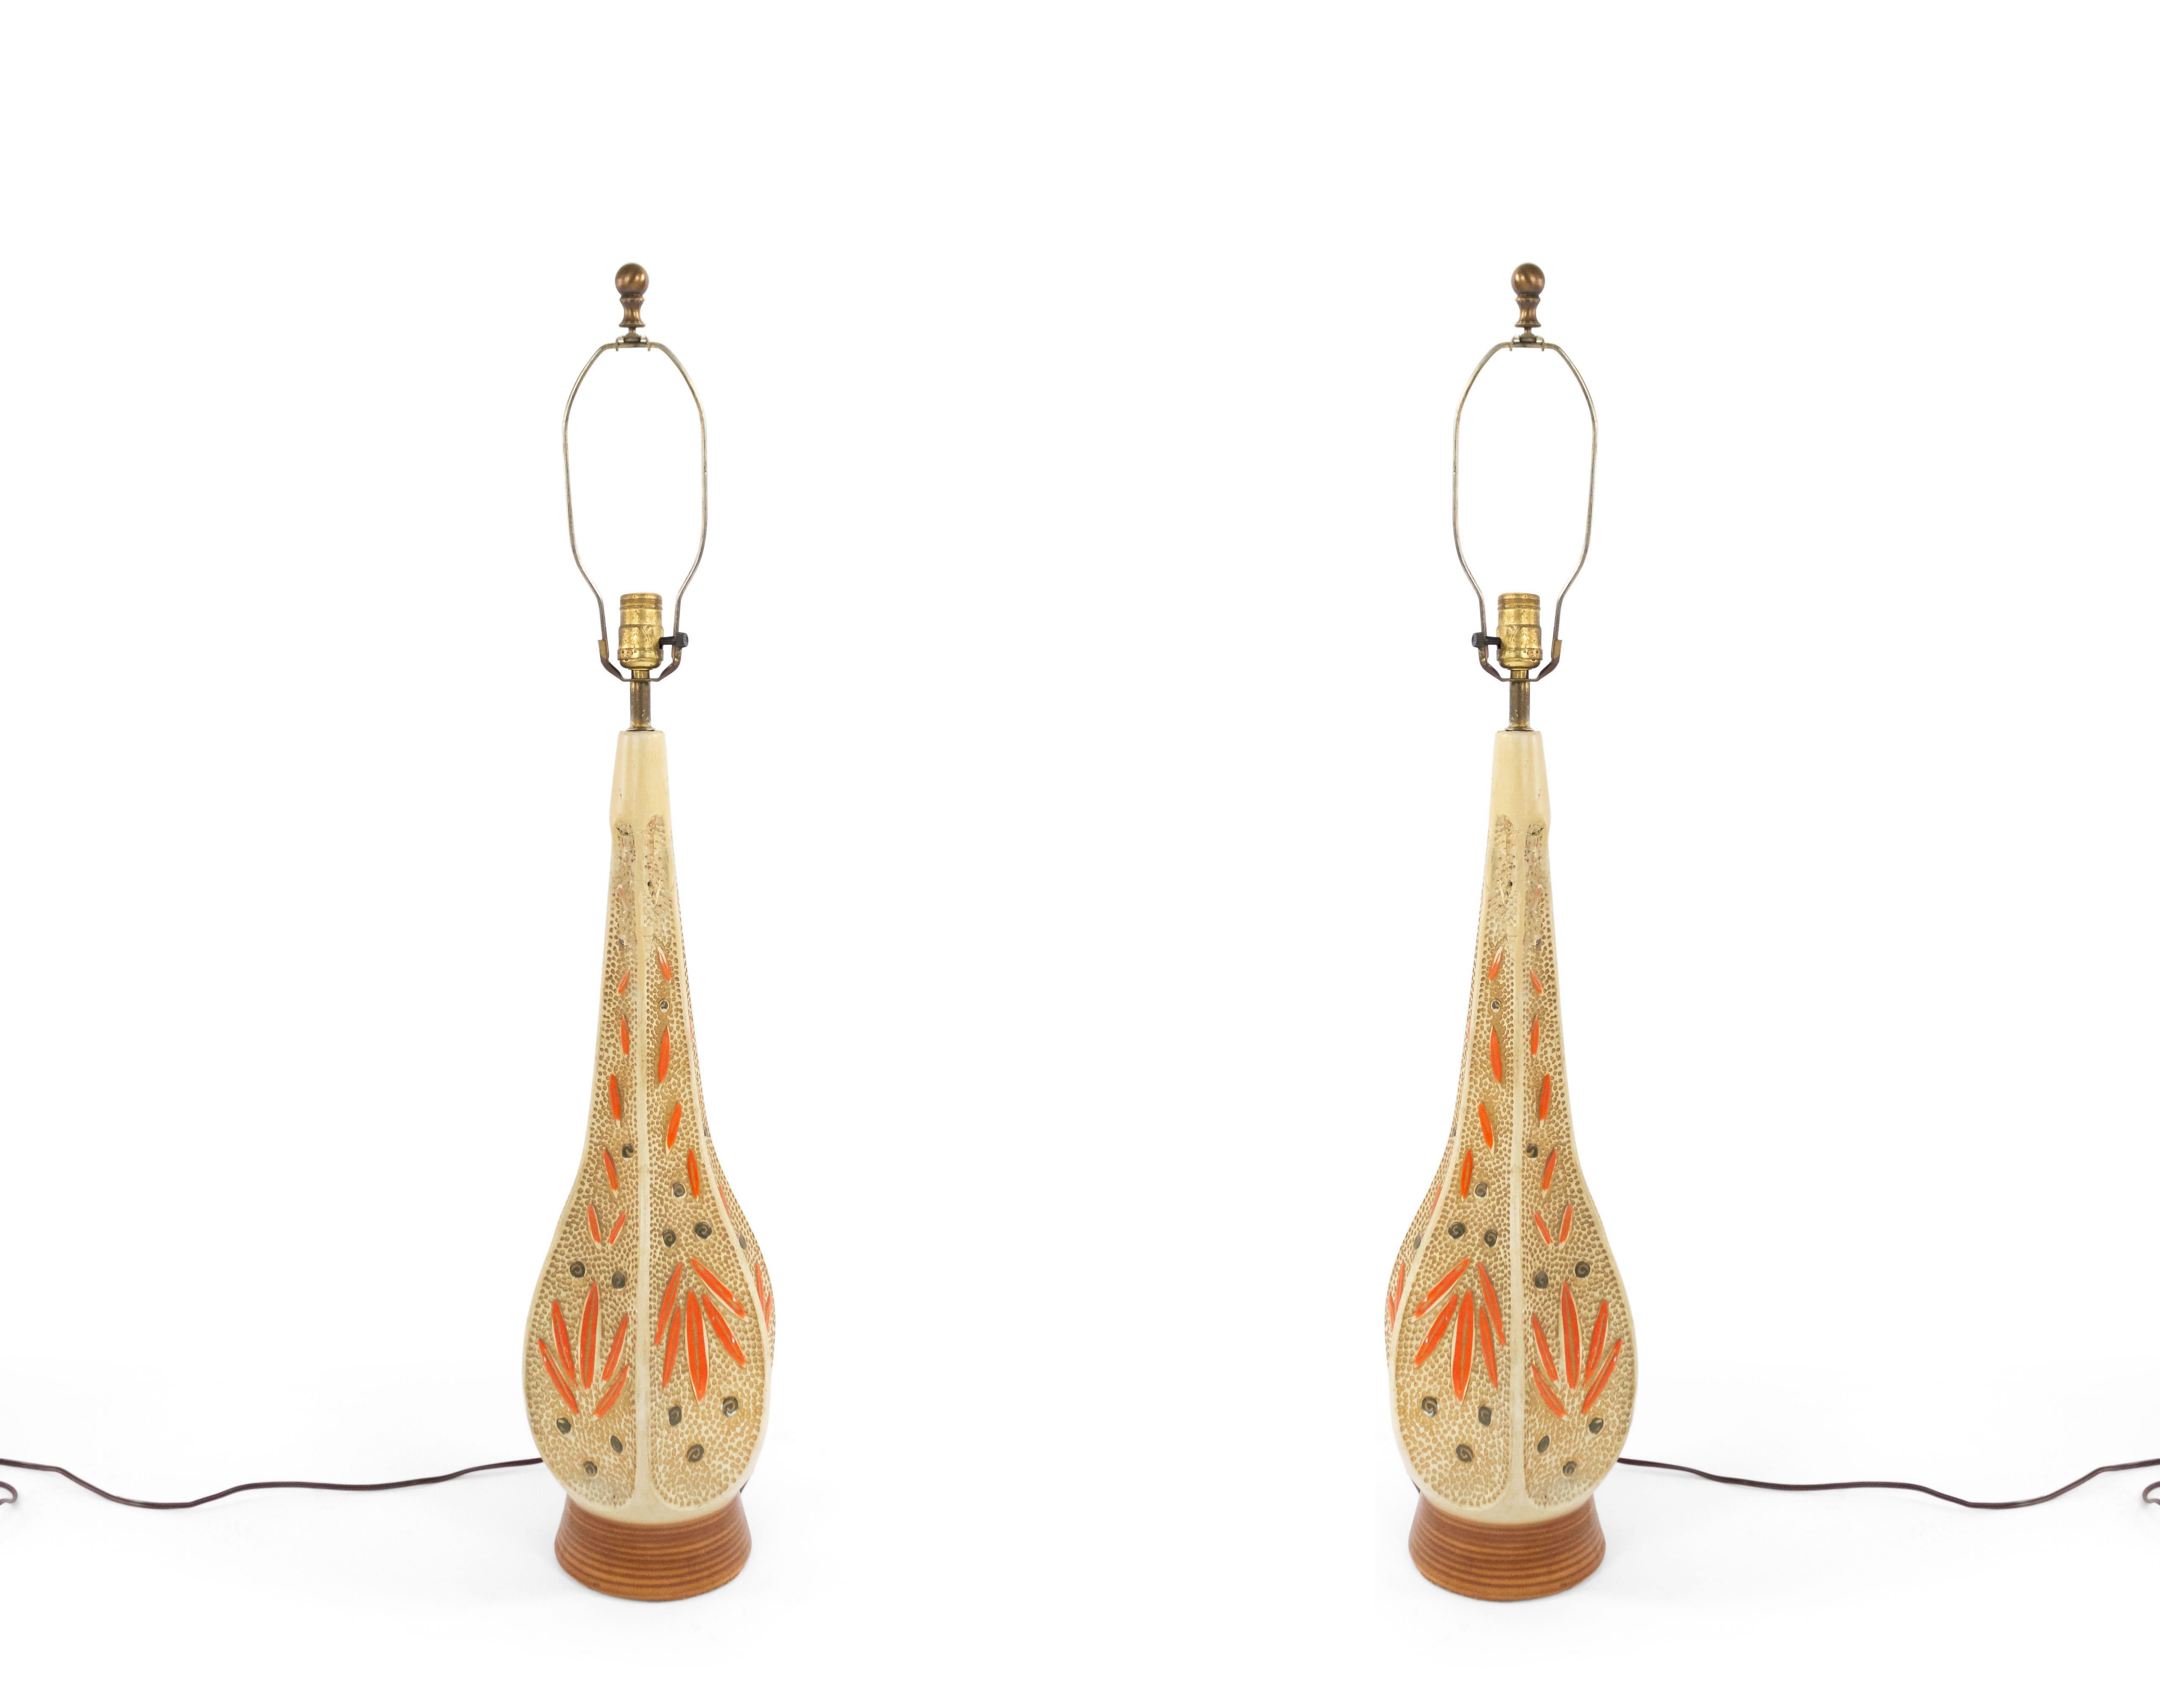 Pair of American Mid-Century beige ceramic 6 sided textured table lamps with a shaped tapered form and orange floral decoration on a round beige base (PRICED AS Pair).
